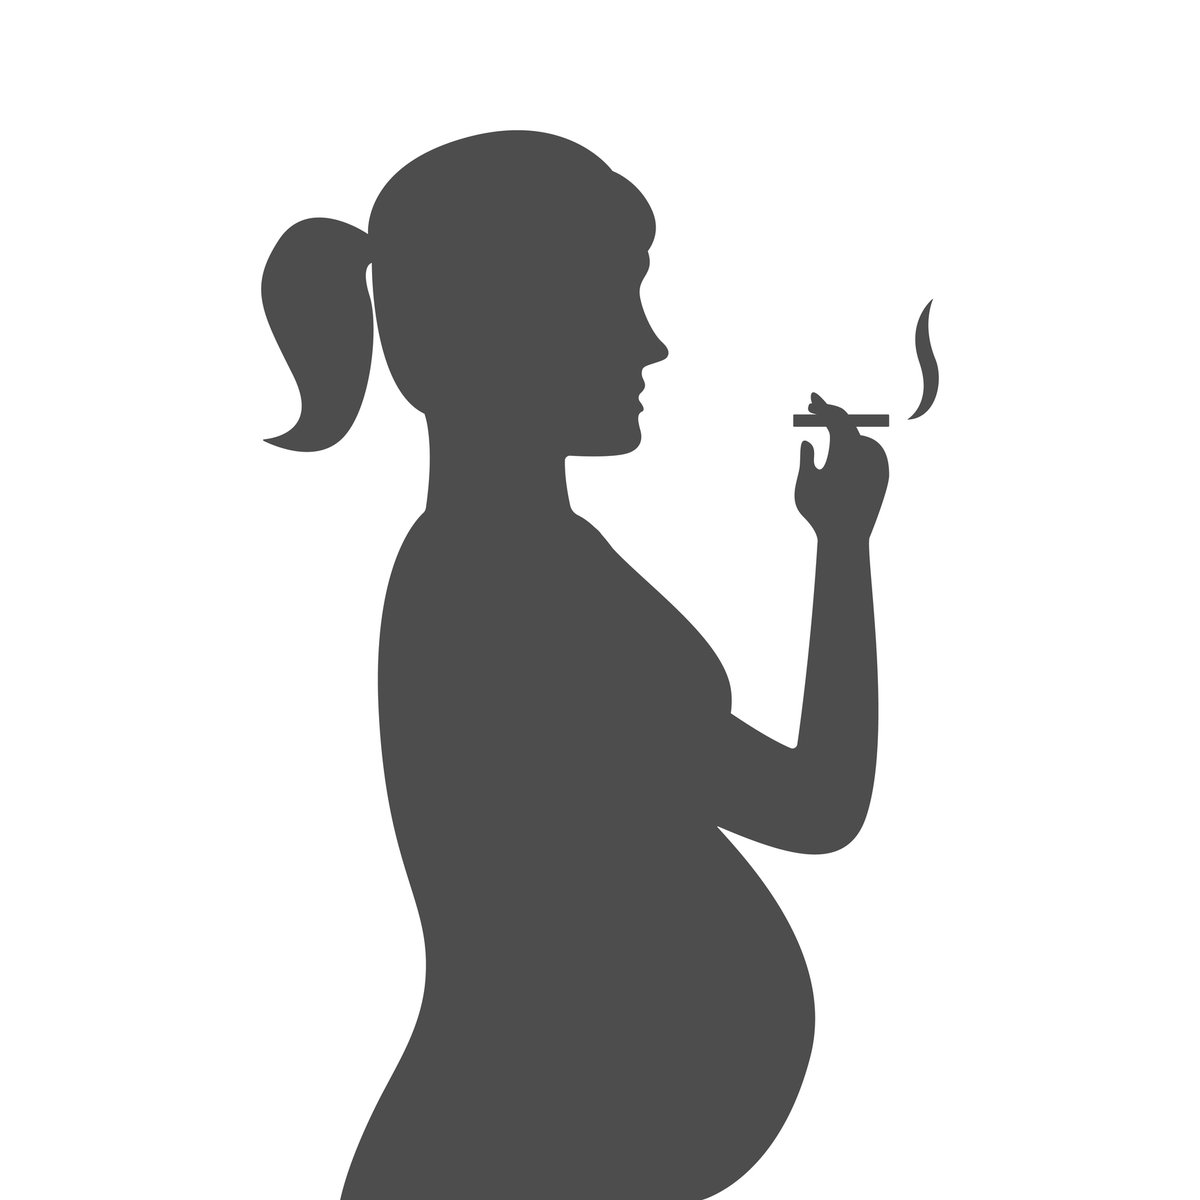 From 2021 to 2022, the percentage of females who smoked during pregnancy declined almost 4% bit.ly/NCHS1043